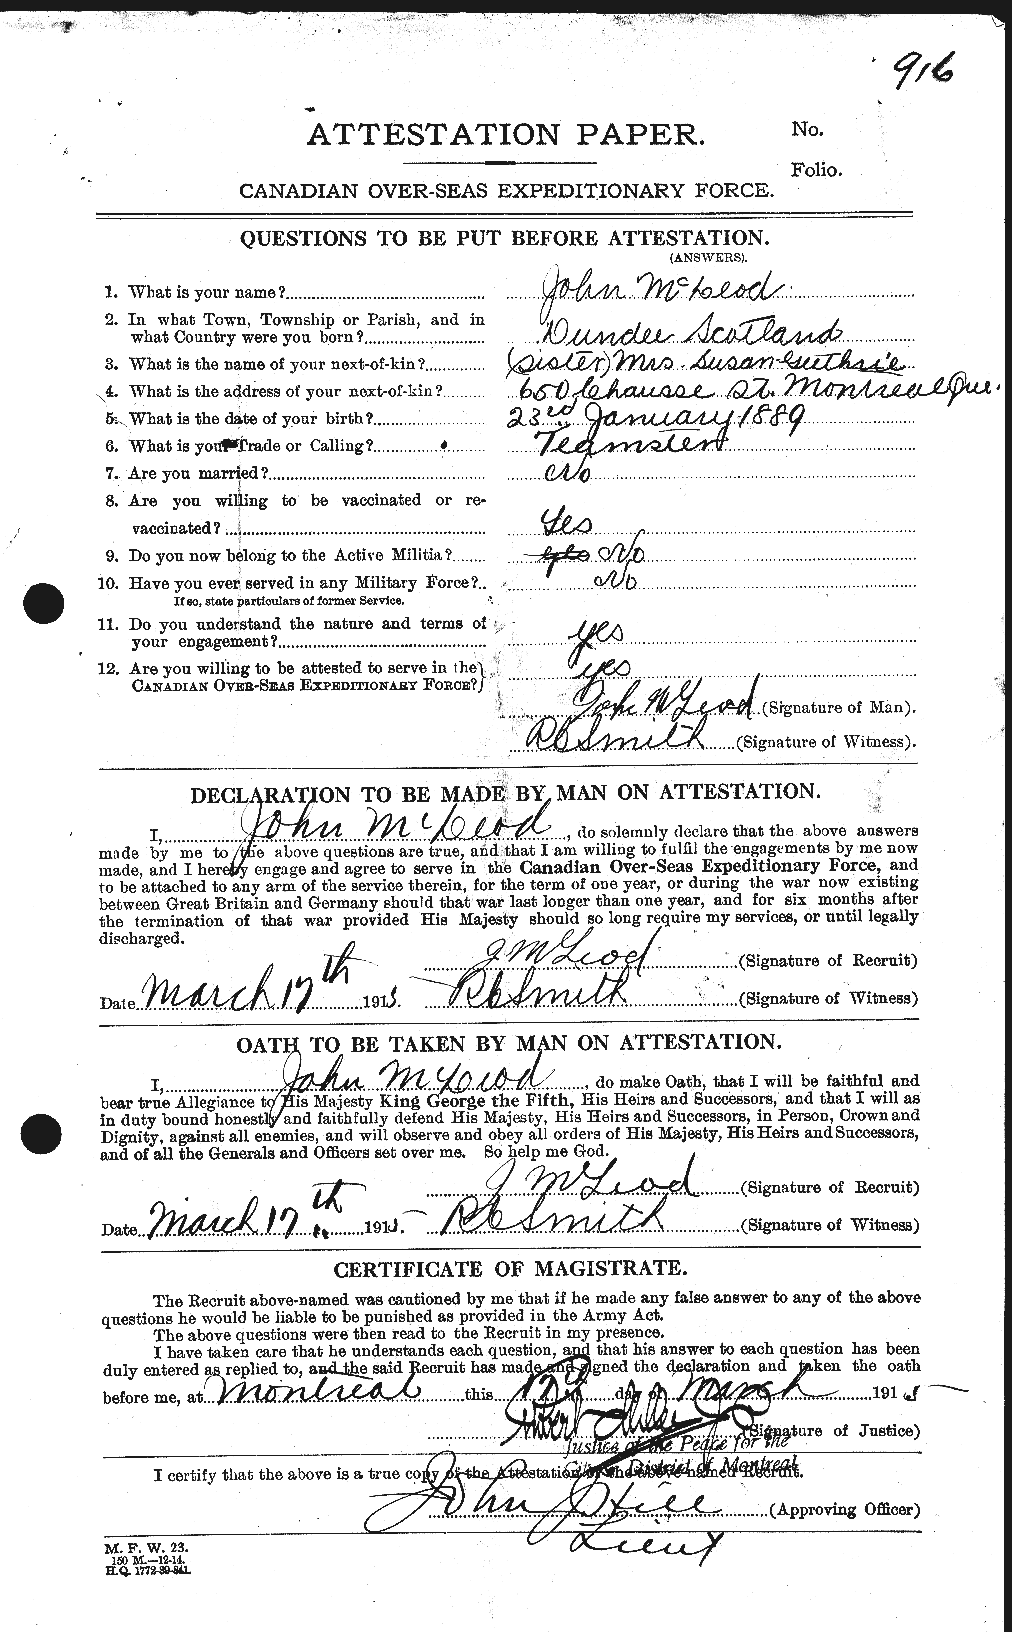 Personnel Records of the First World War - CEF 542571a